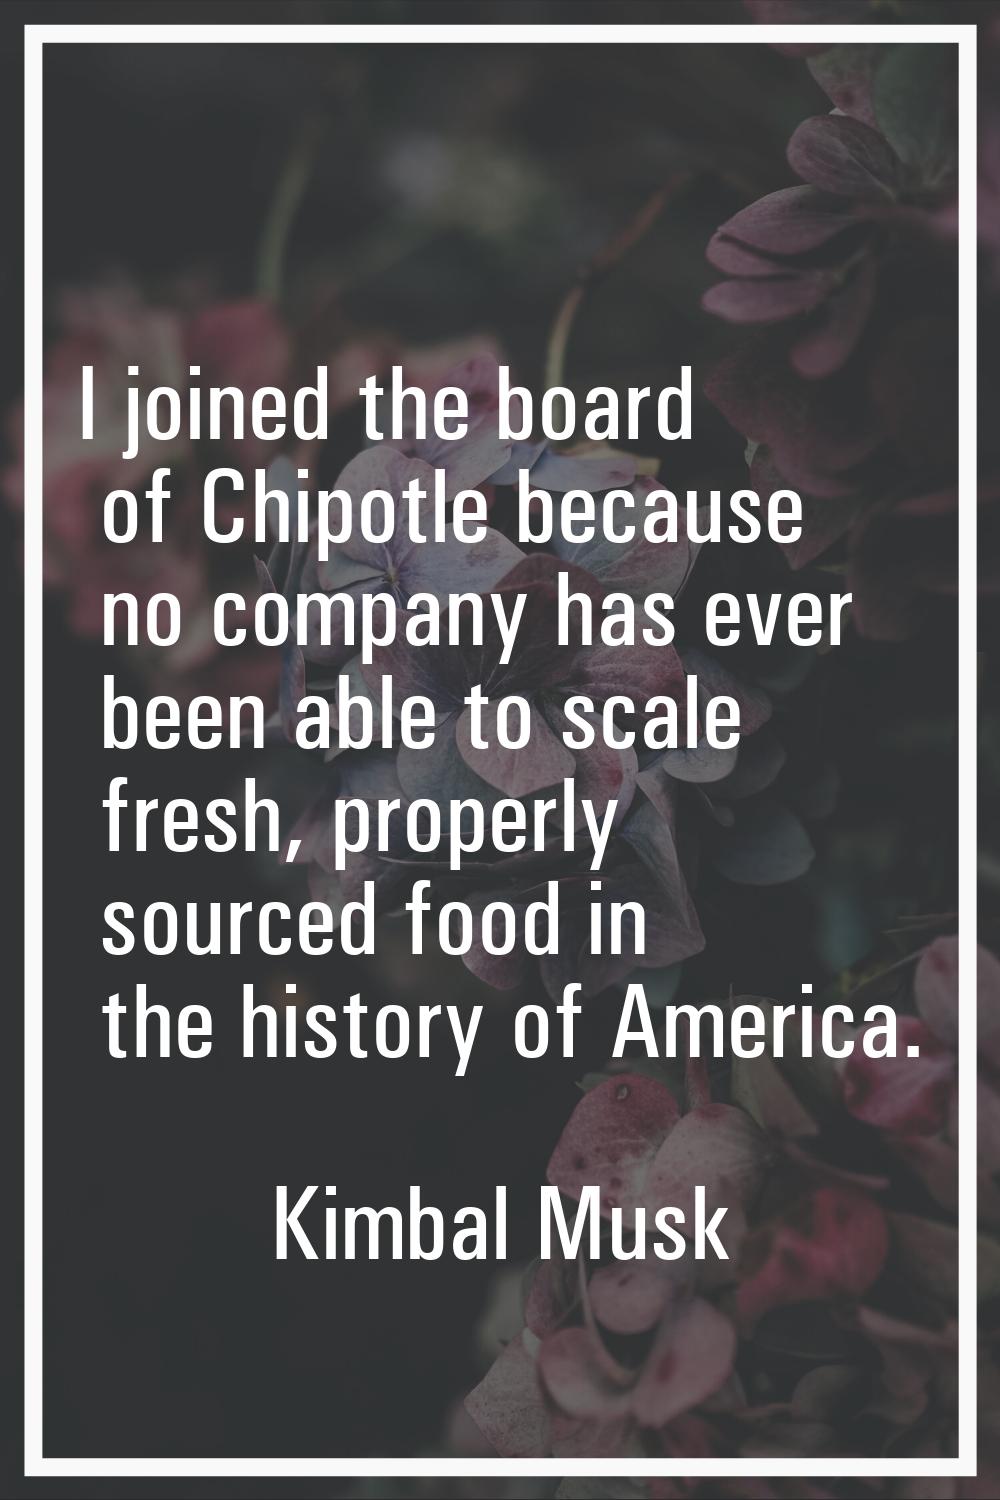 I joined the board of Chipotle because no company has ever been able to scale fresh, properly sourc